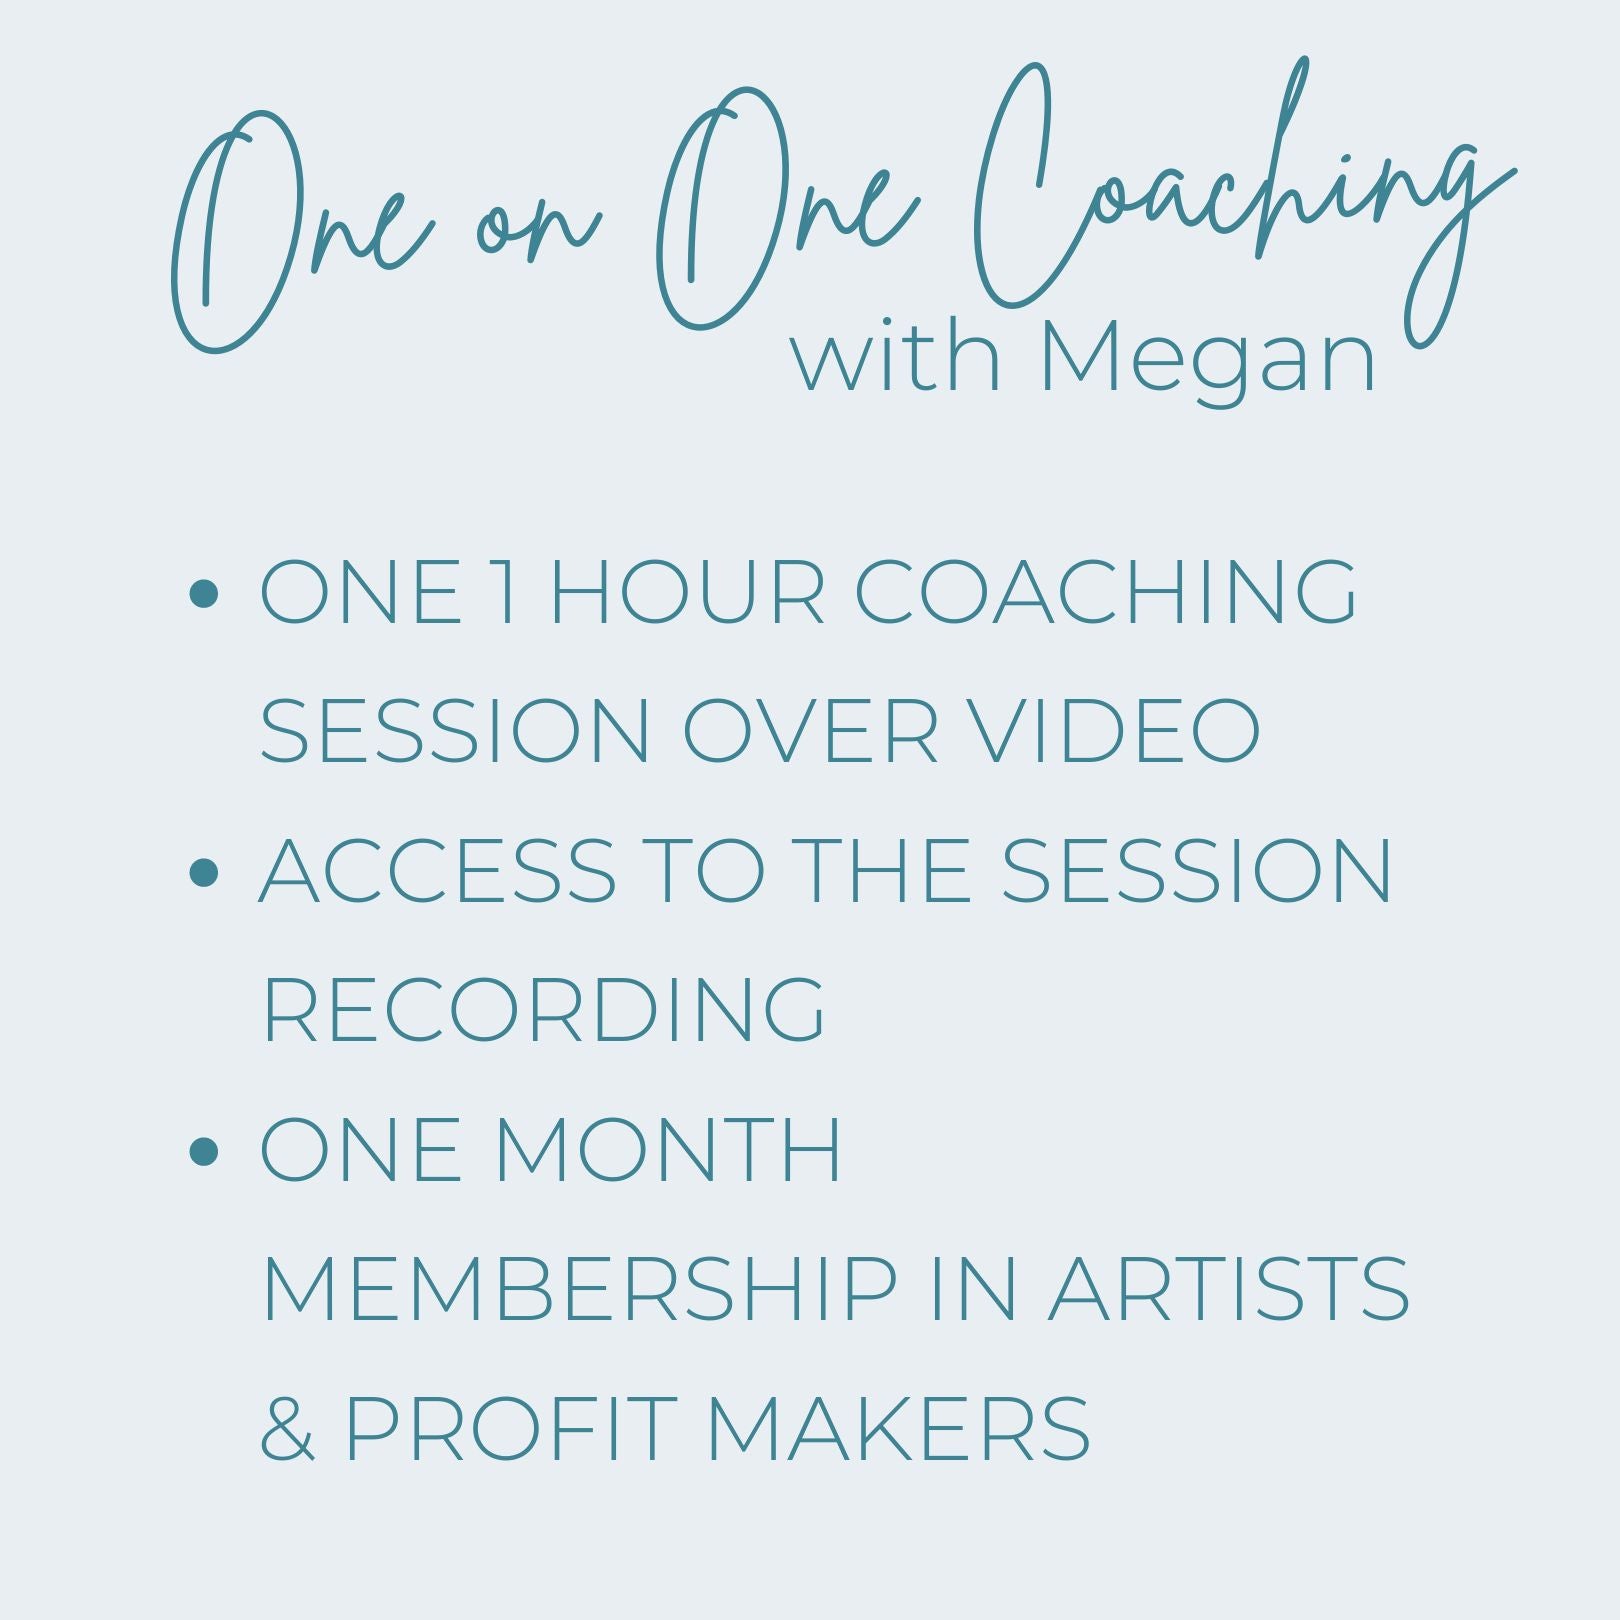 One on One Coaching with Megan - Single Session